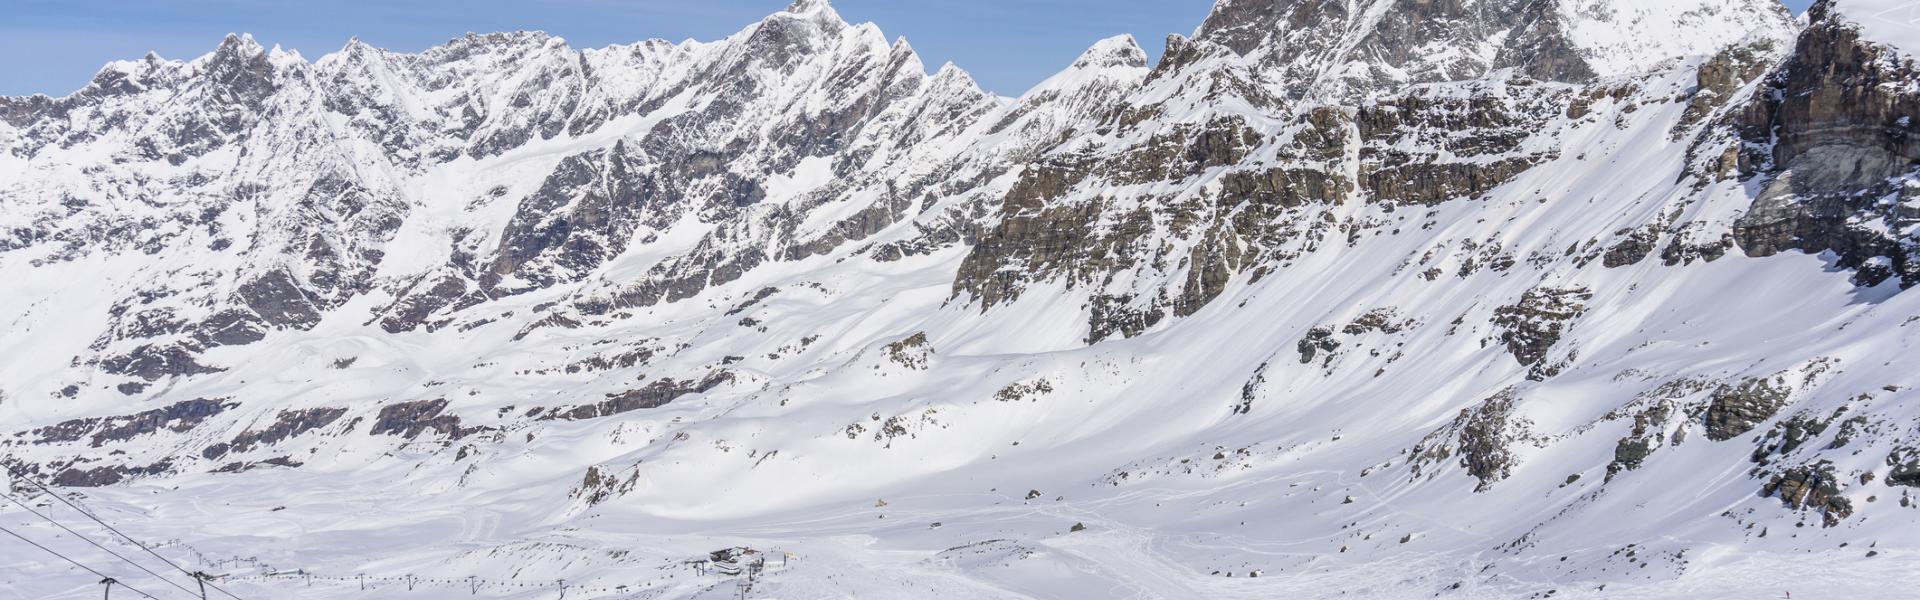 Holiday lettings & accommodation in Breuil-Cervinia - HomeToGo